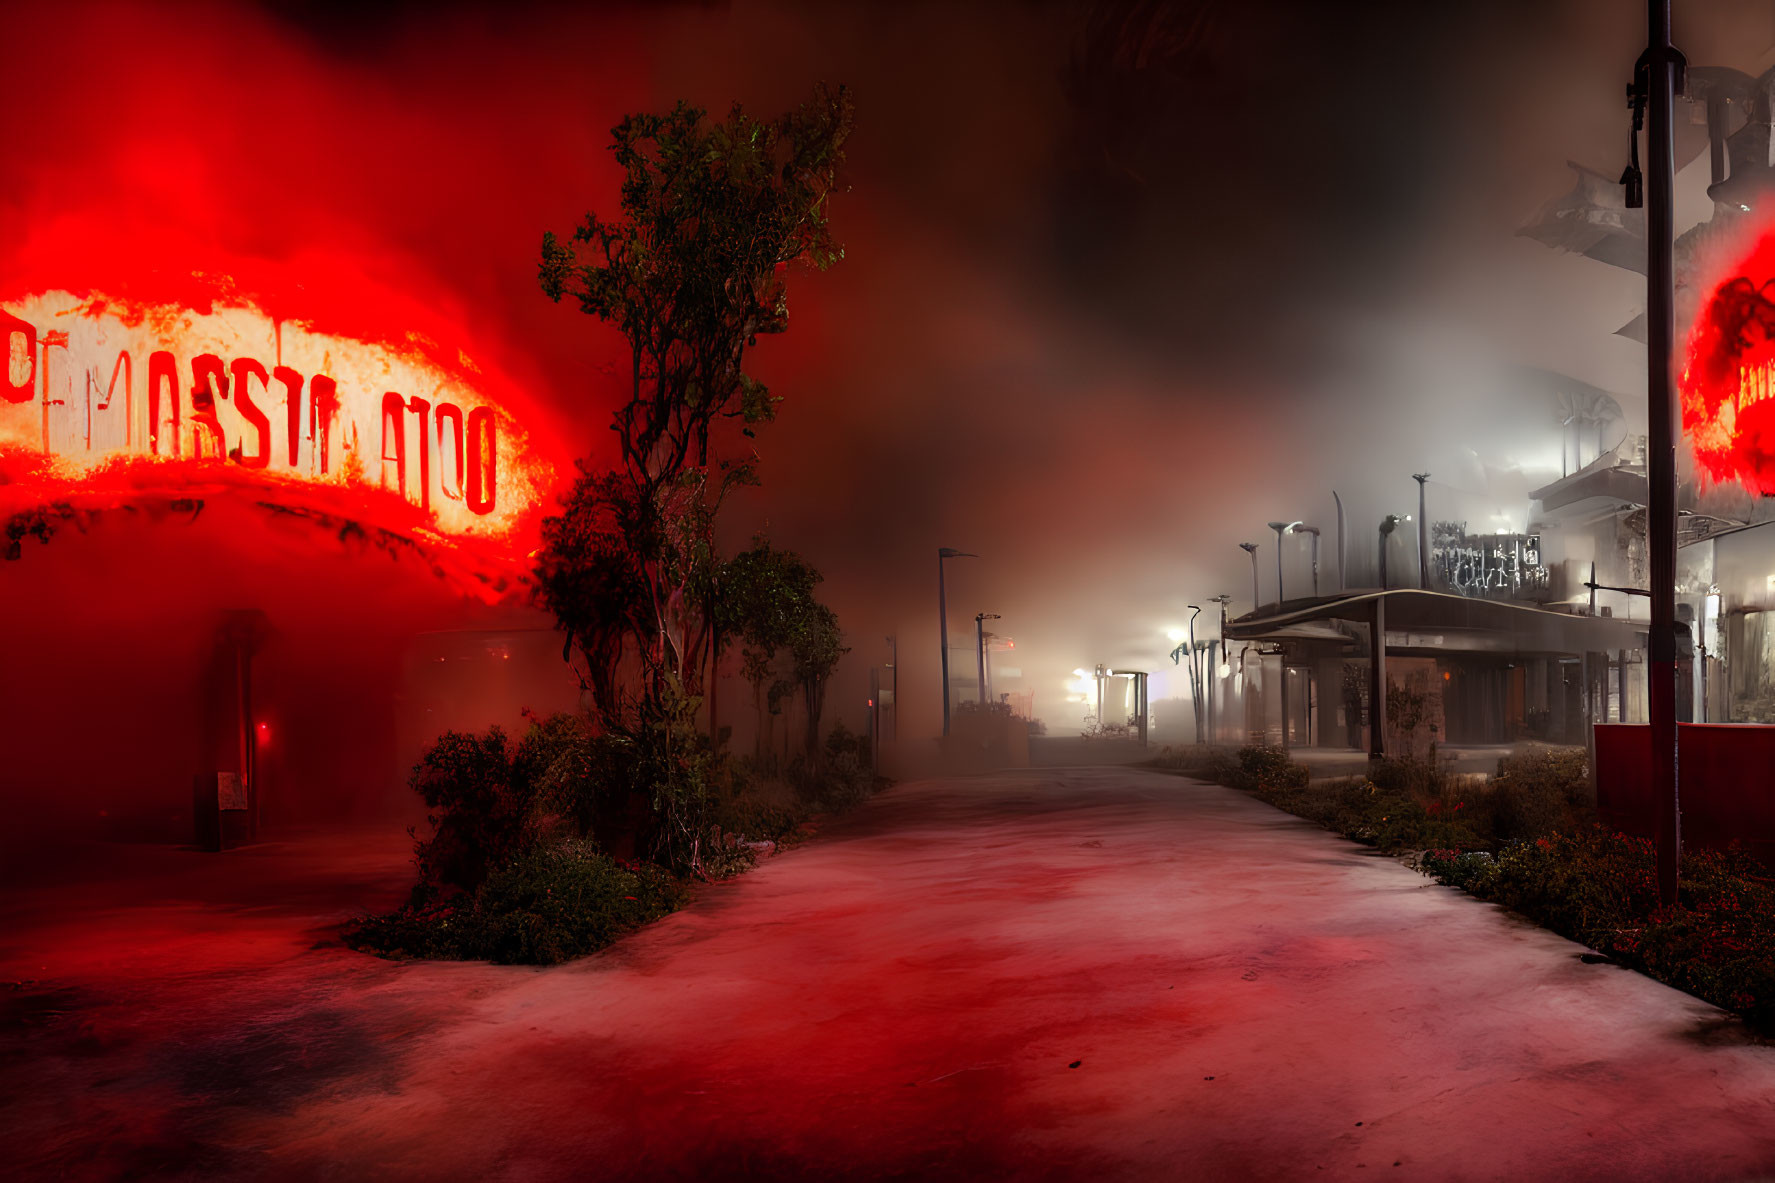 Eerie red-lit foggy night with neon signs on deserted street